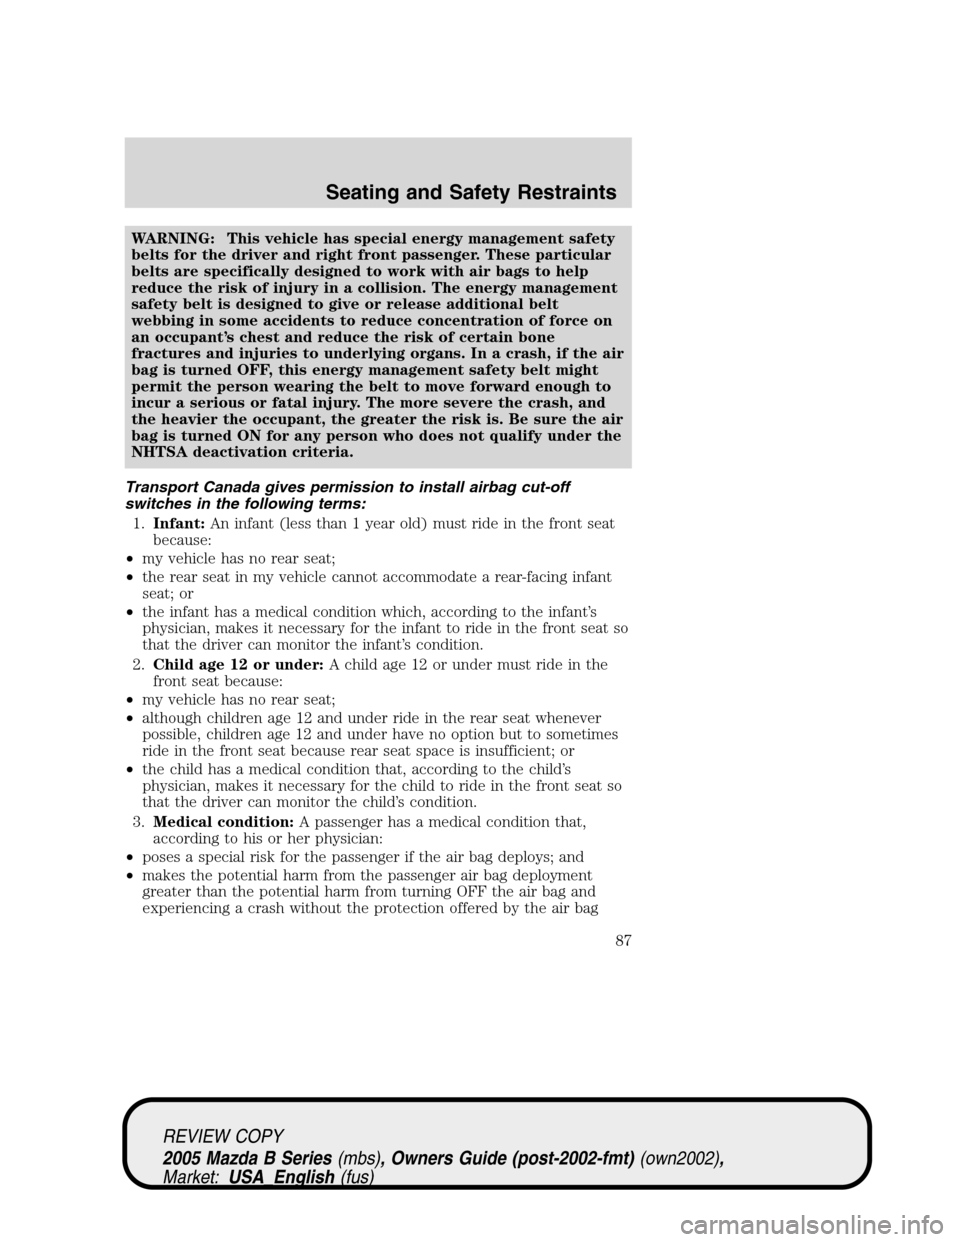 MAZDA MODEL B2300 TRUCK 2005  Owners Manual (in English) WARNING: This vehicle has special energy management safety
belts for the driver and right front passenger. These particular
belts are specifically designed to work with air bags to help
reduce the ris